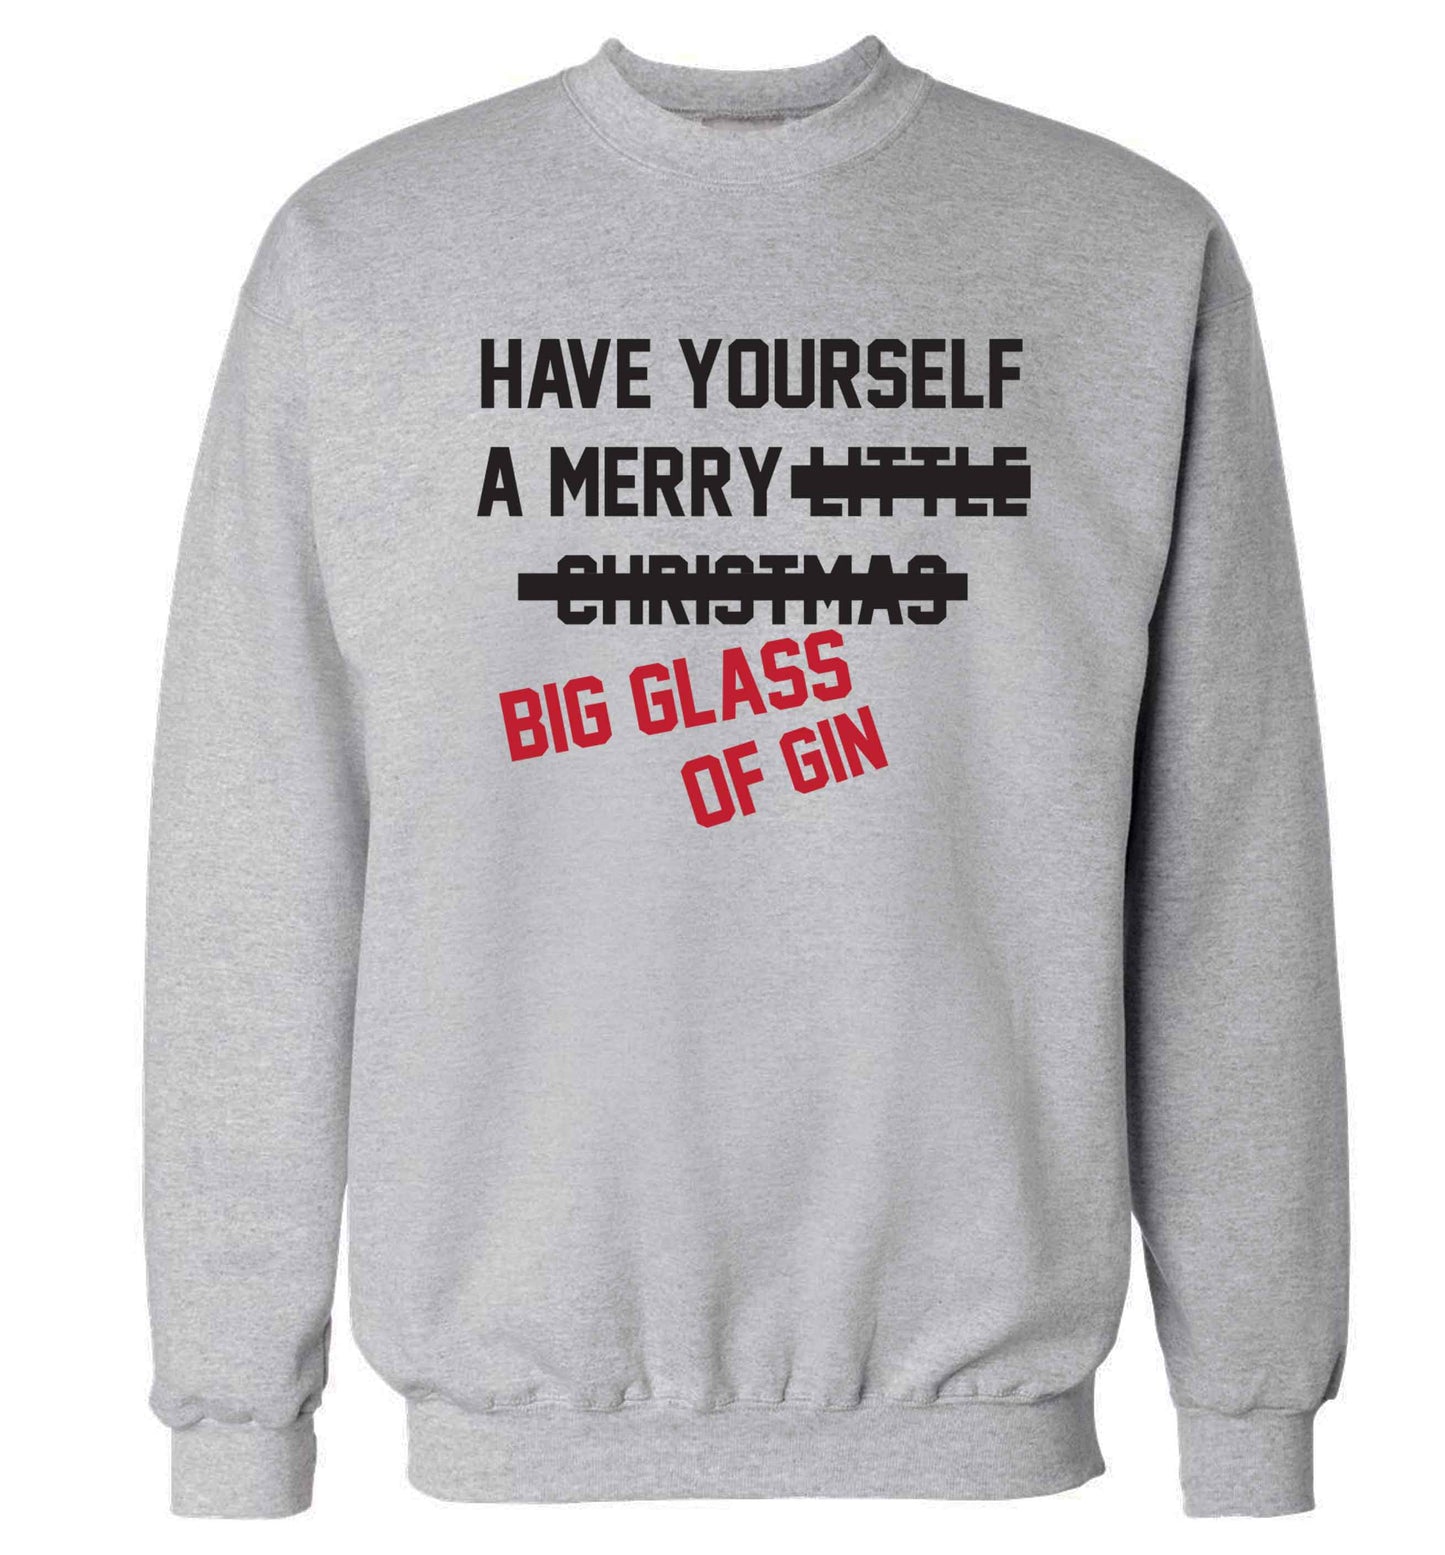 Have yourself a merry big glass of gin Adult's unisex grey Sweater 2XL